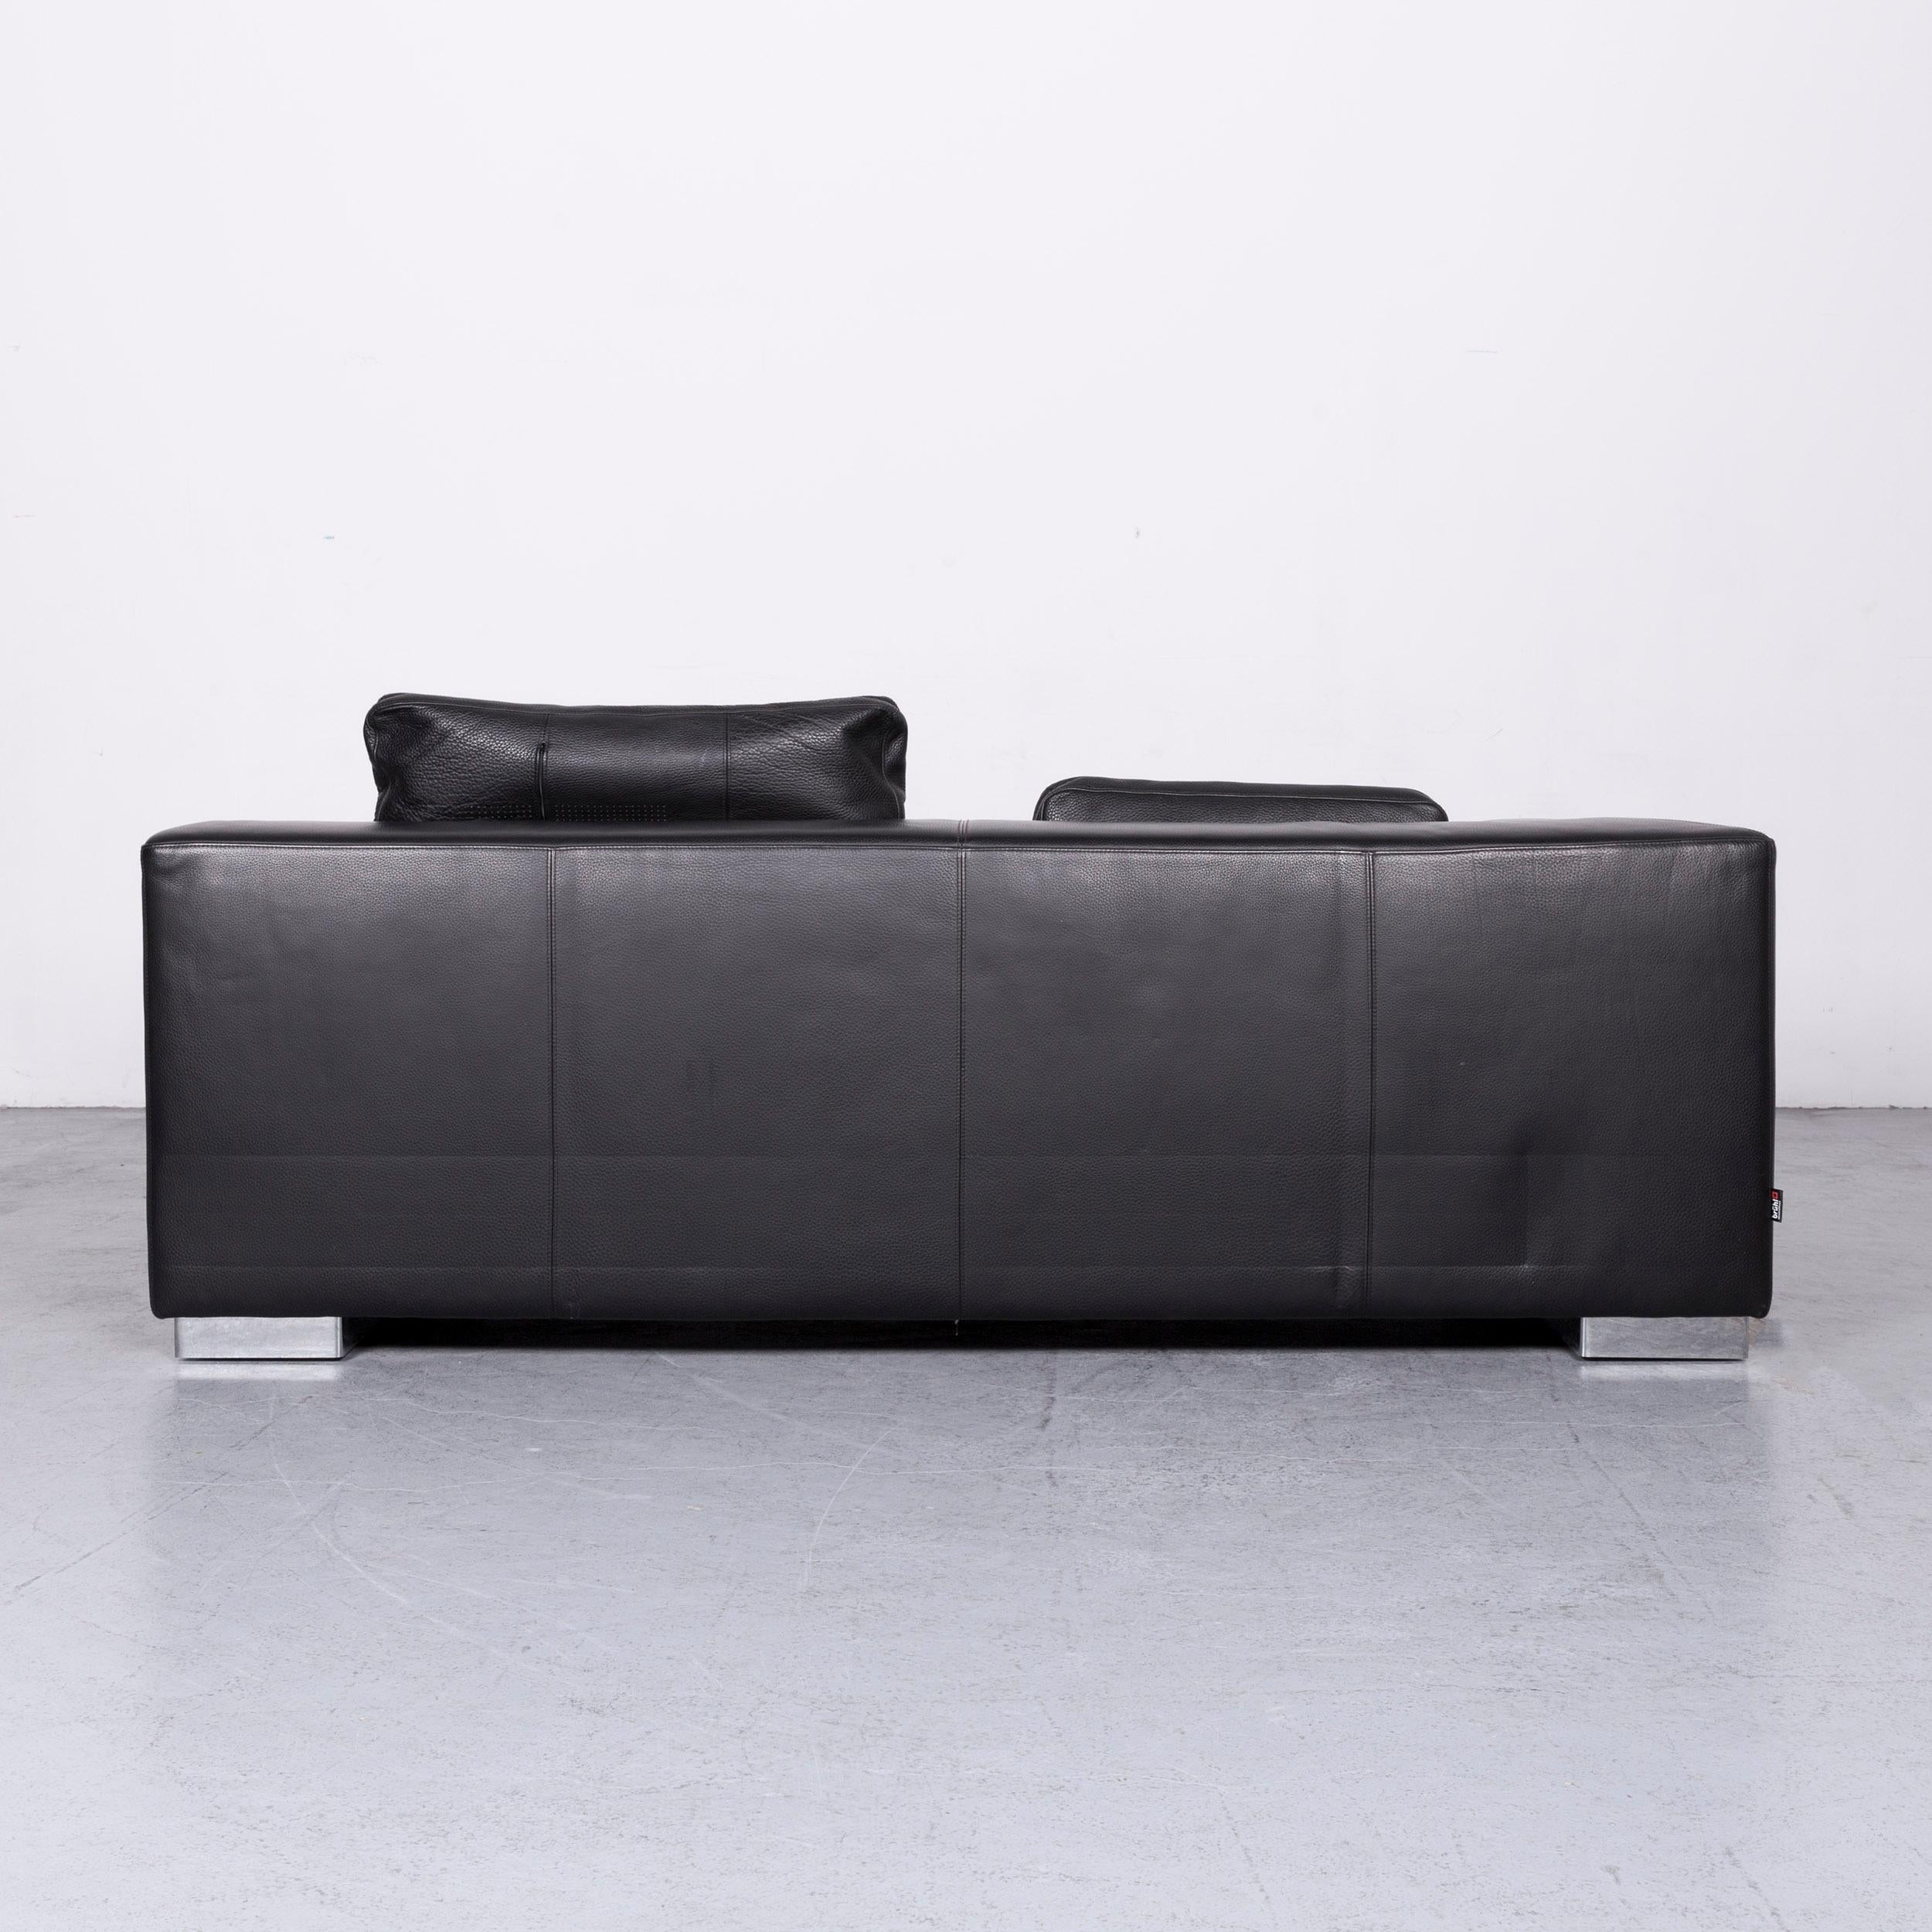 Brühl & Sippold Designer Sofa Set Leather Black Two-Seat Couch Modern For Sale 4